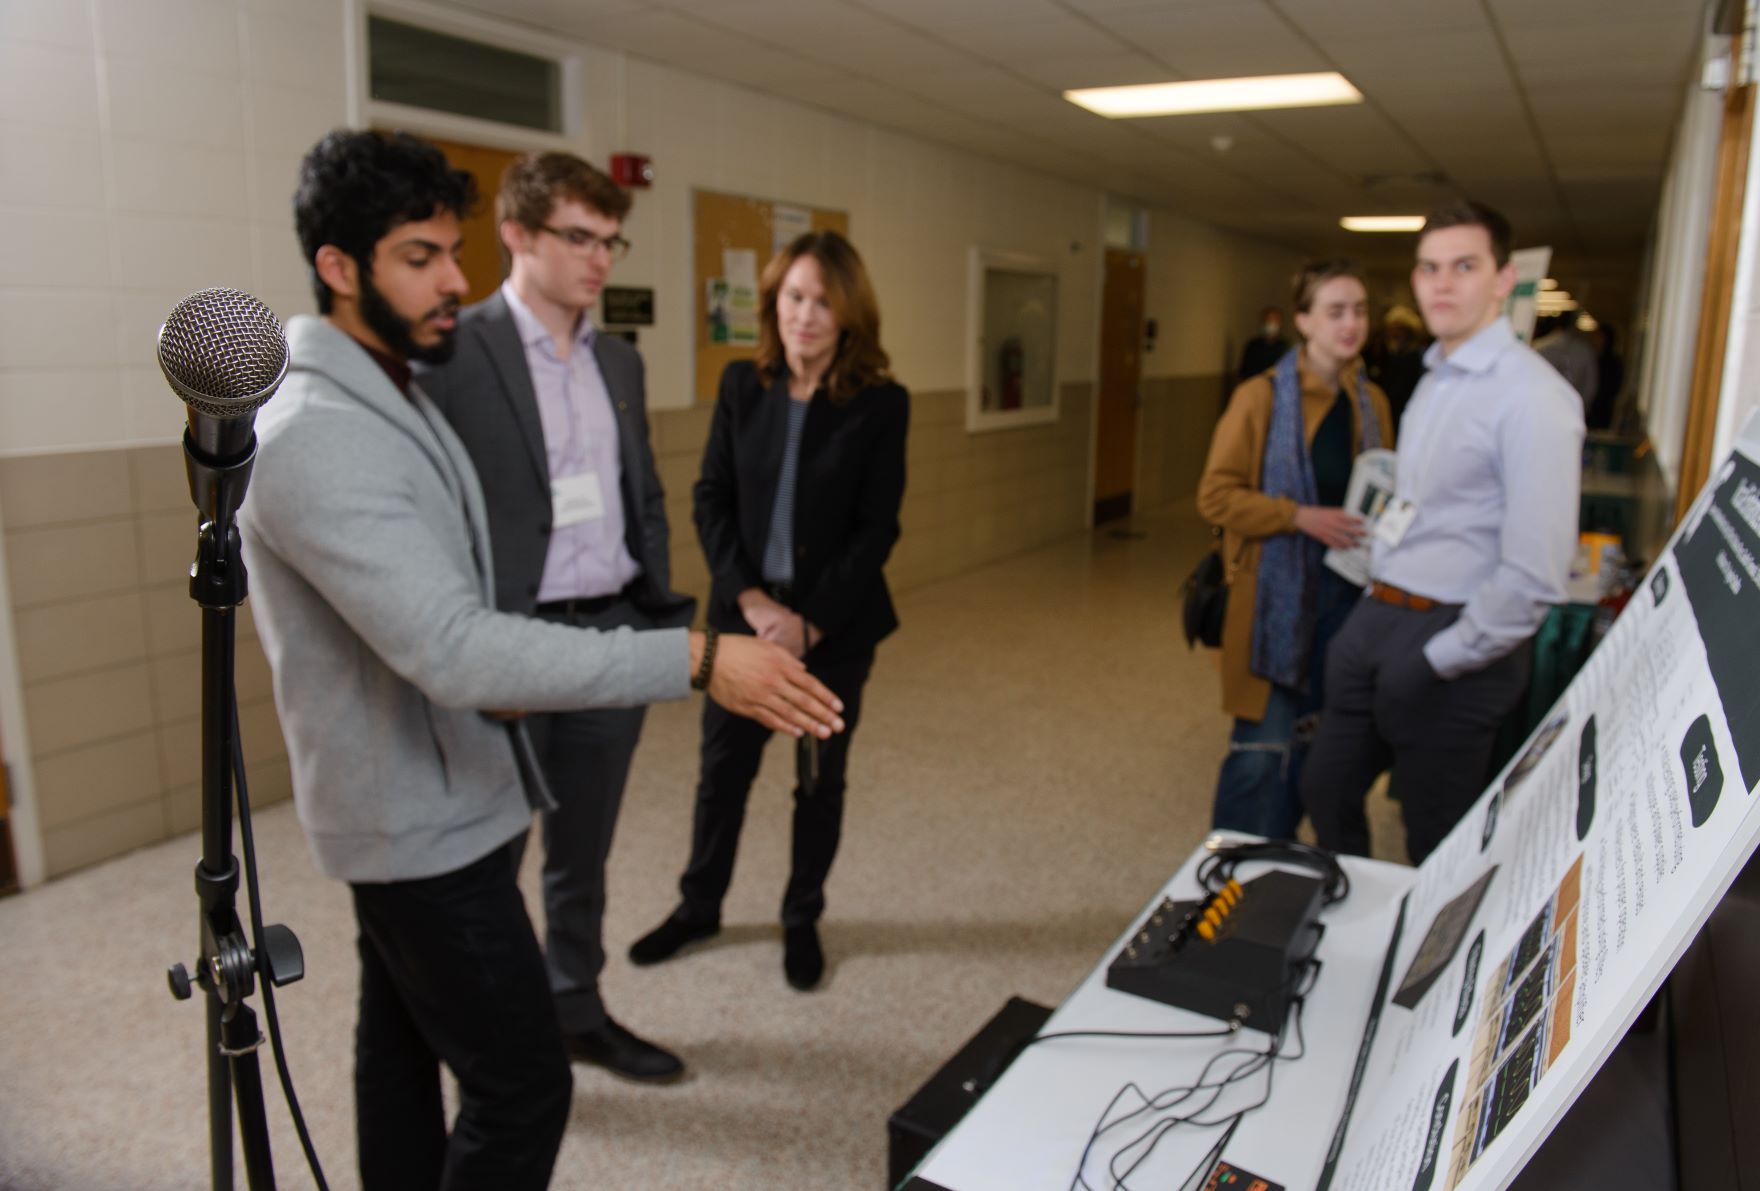 Electrical Engineering students show off their voice enhancement device